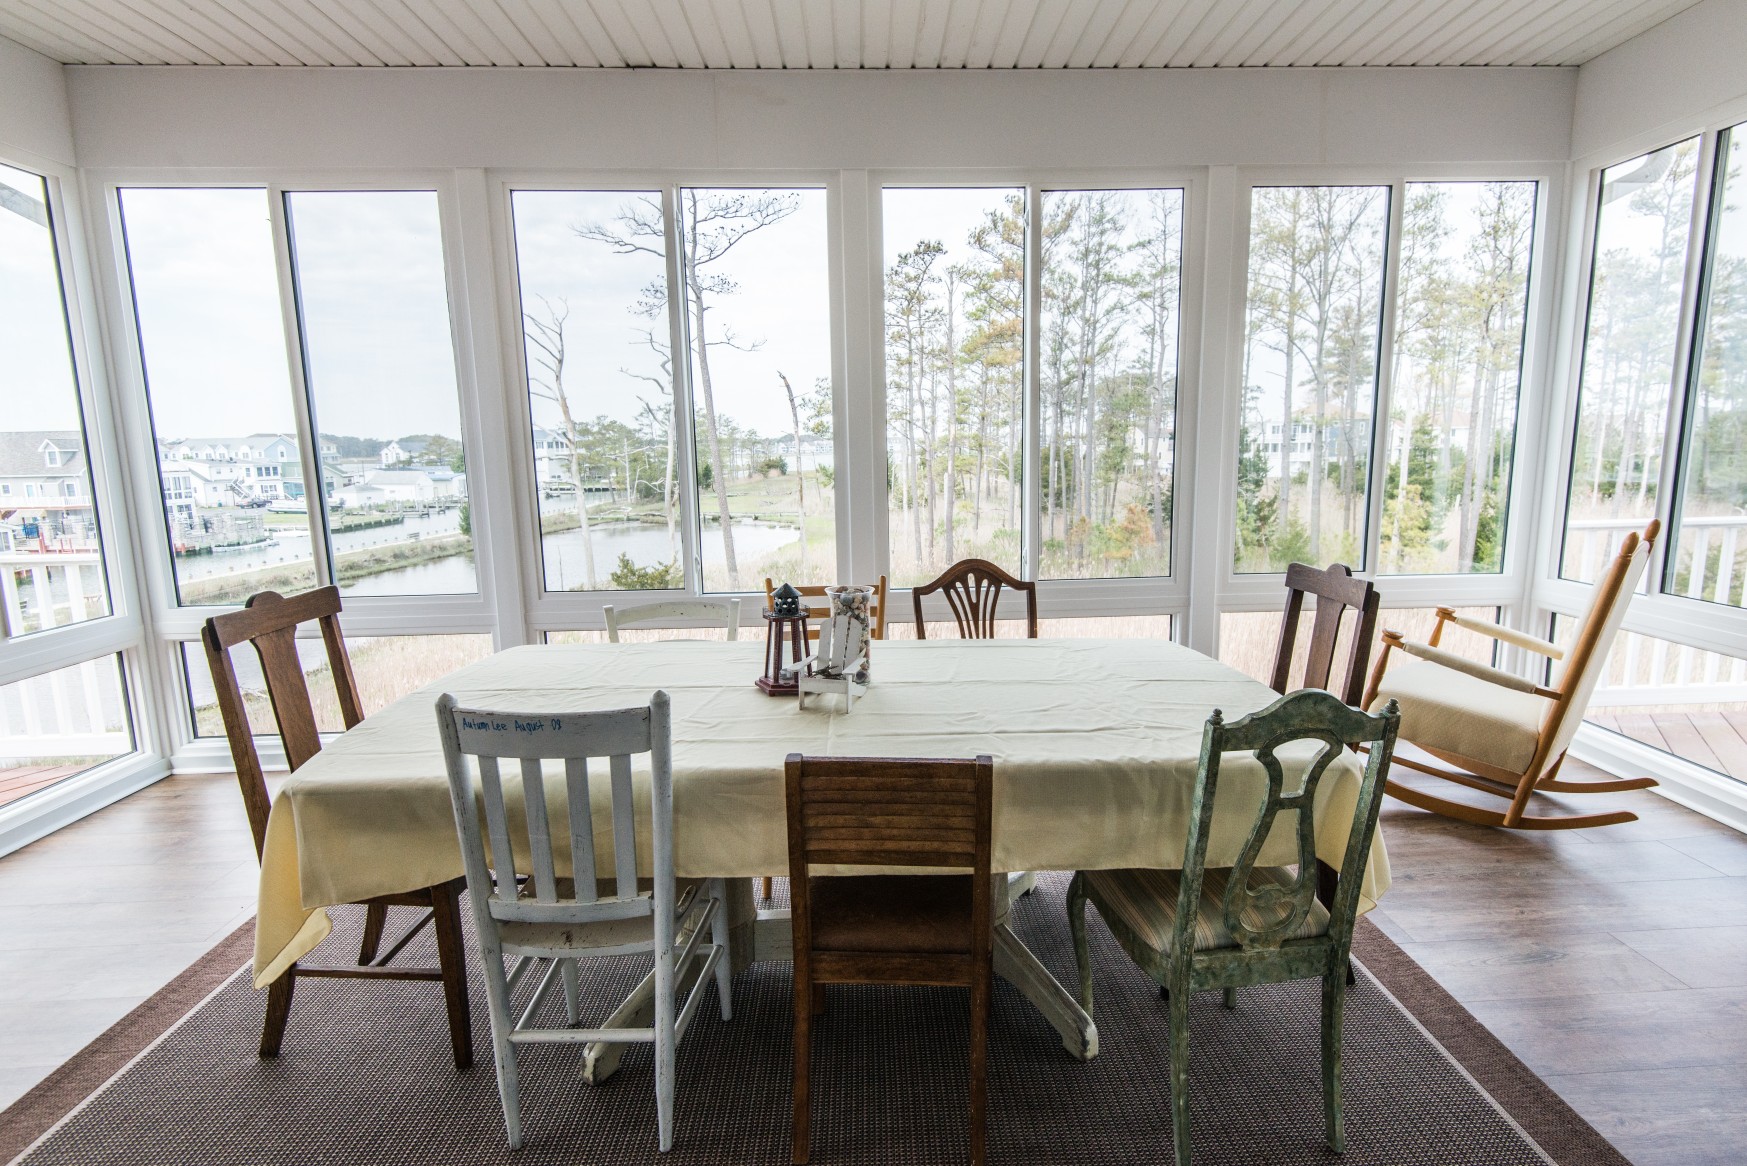 Whitesview Court House Lift New Addition in Ocean View DE Four Season Sunroom with Wood Flooring, Large Table and Rocking Chair